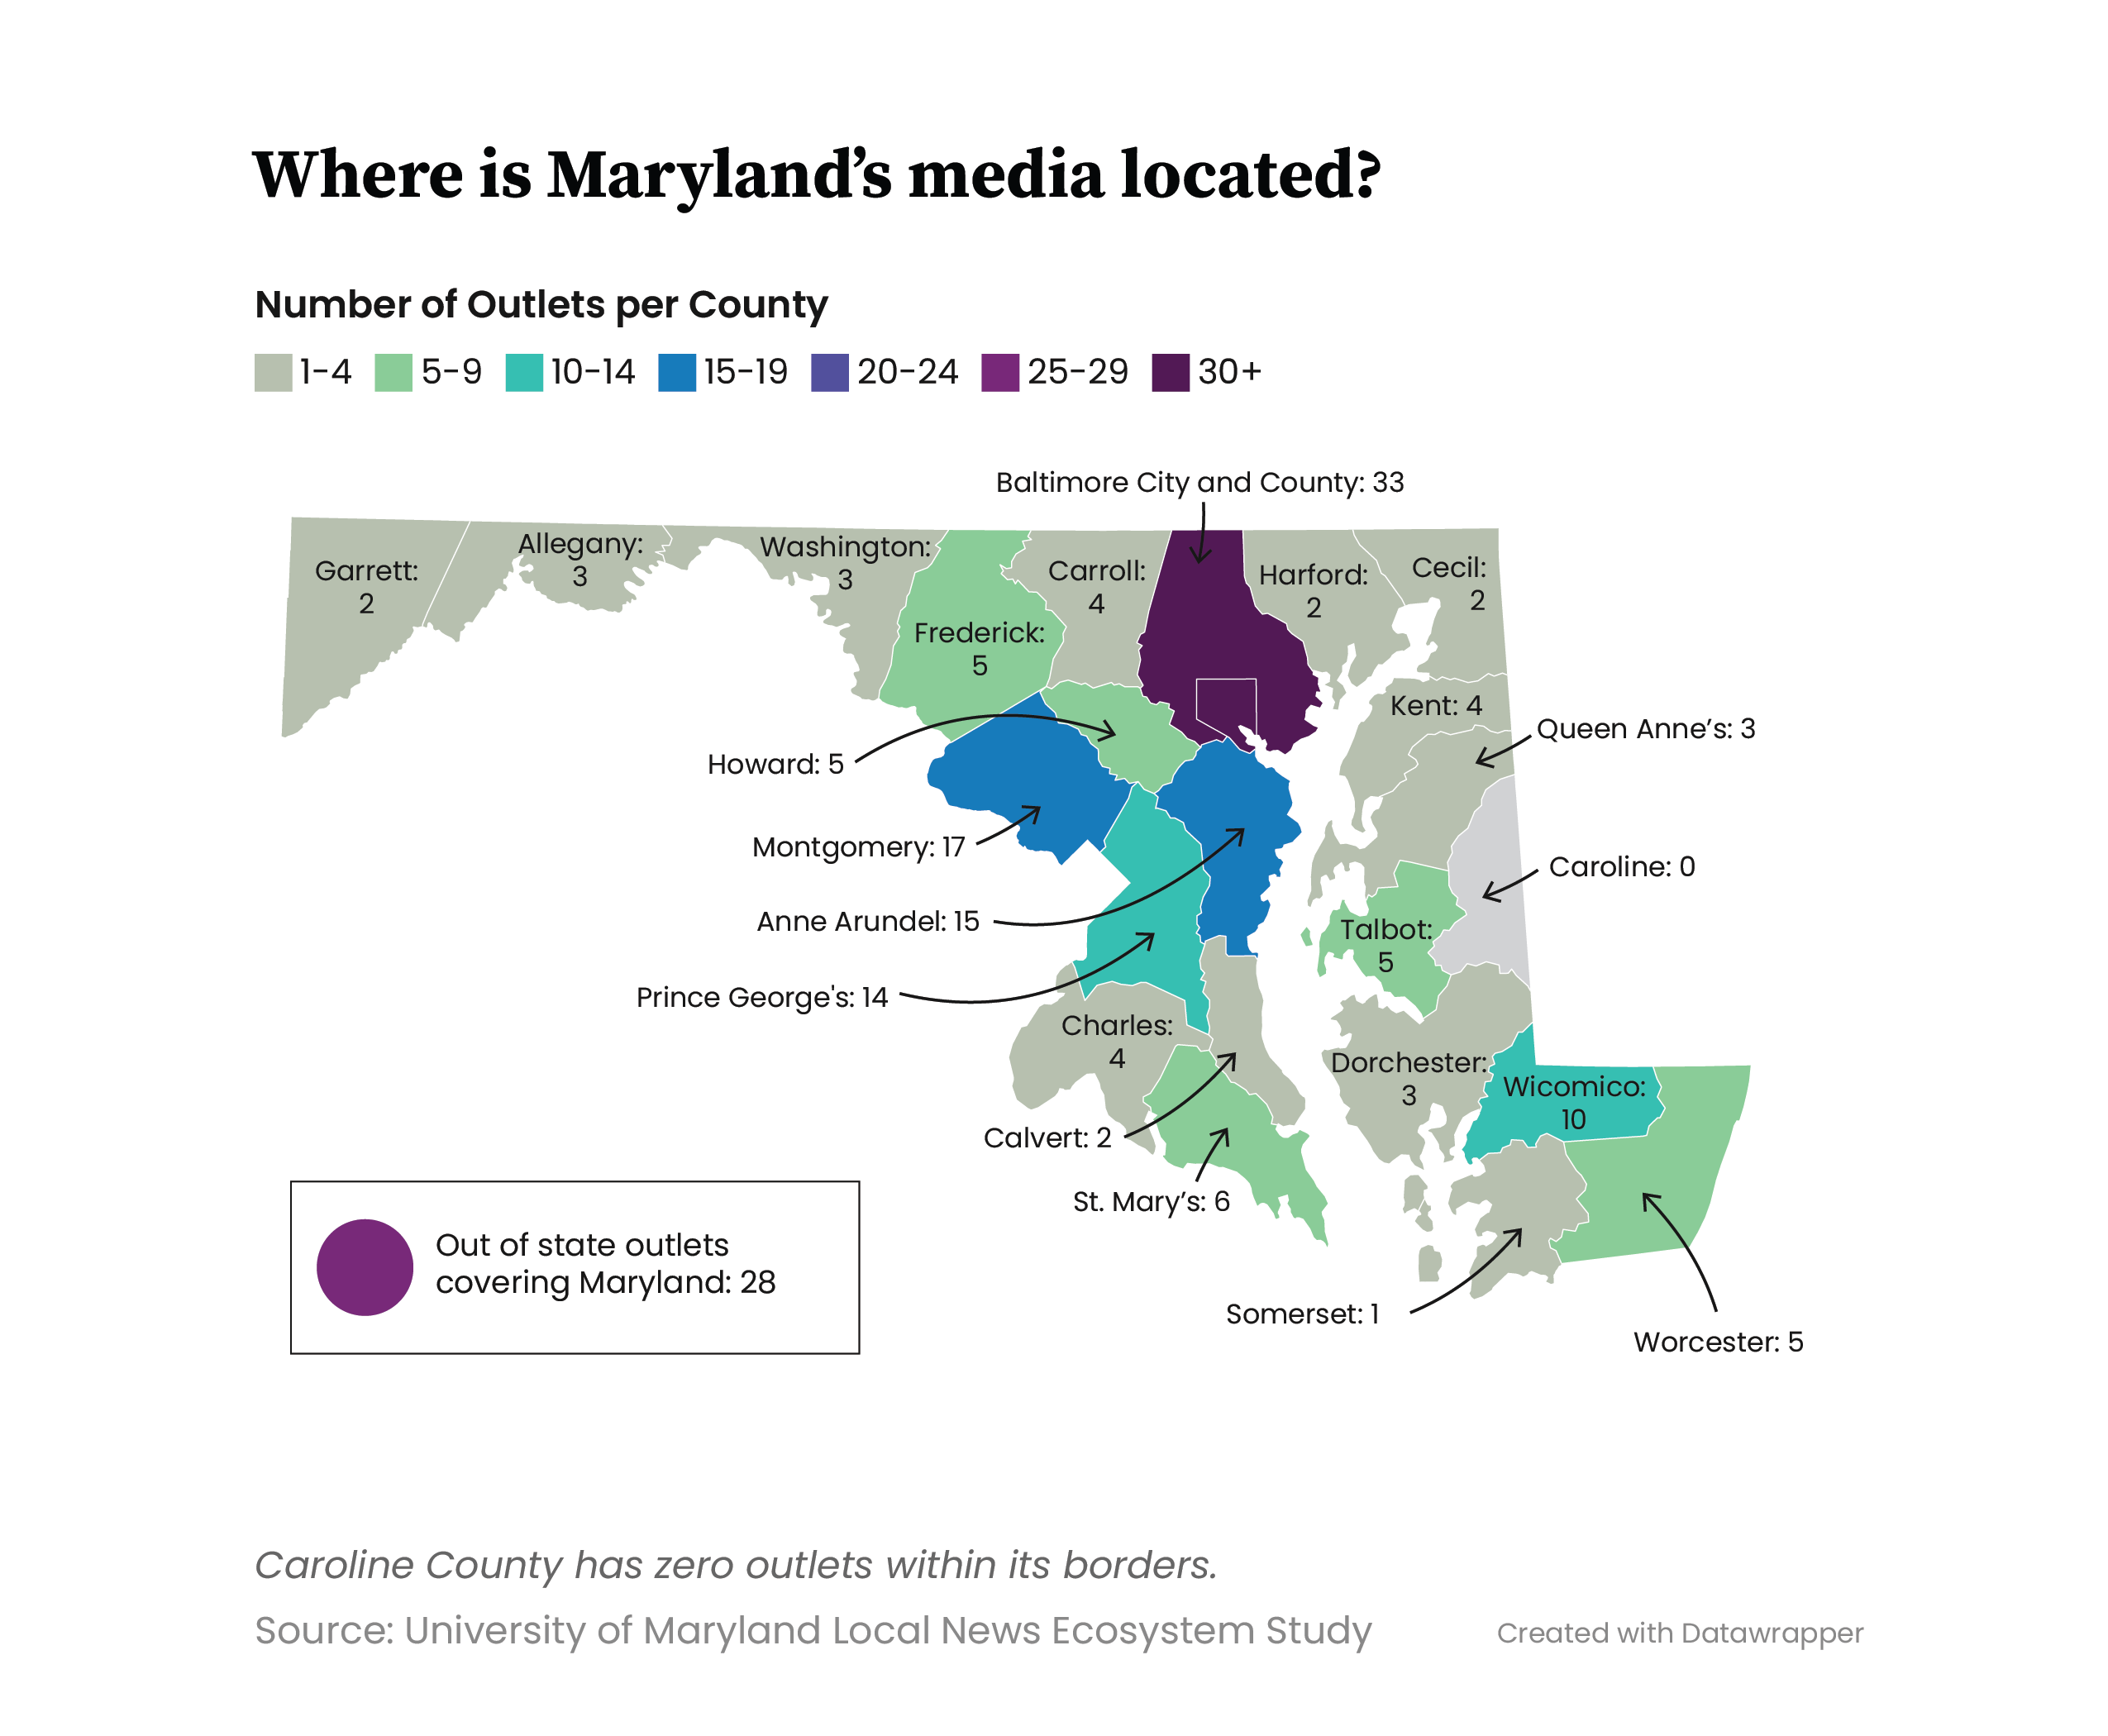 UMD Local News Ecosystem Study map of local news outlets in Maryland